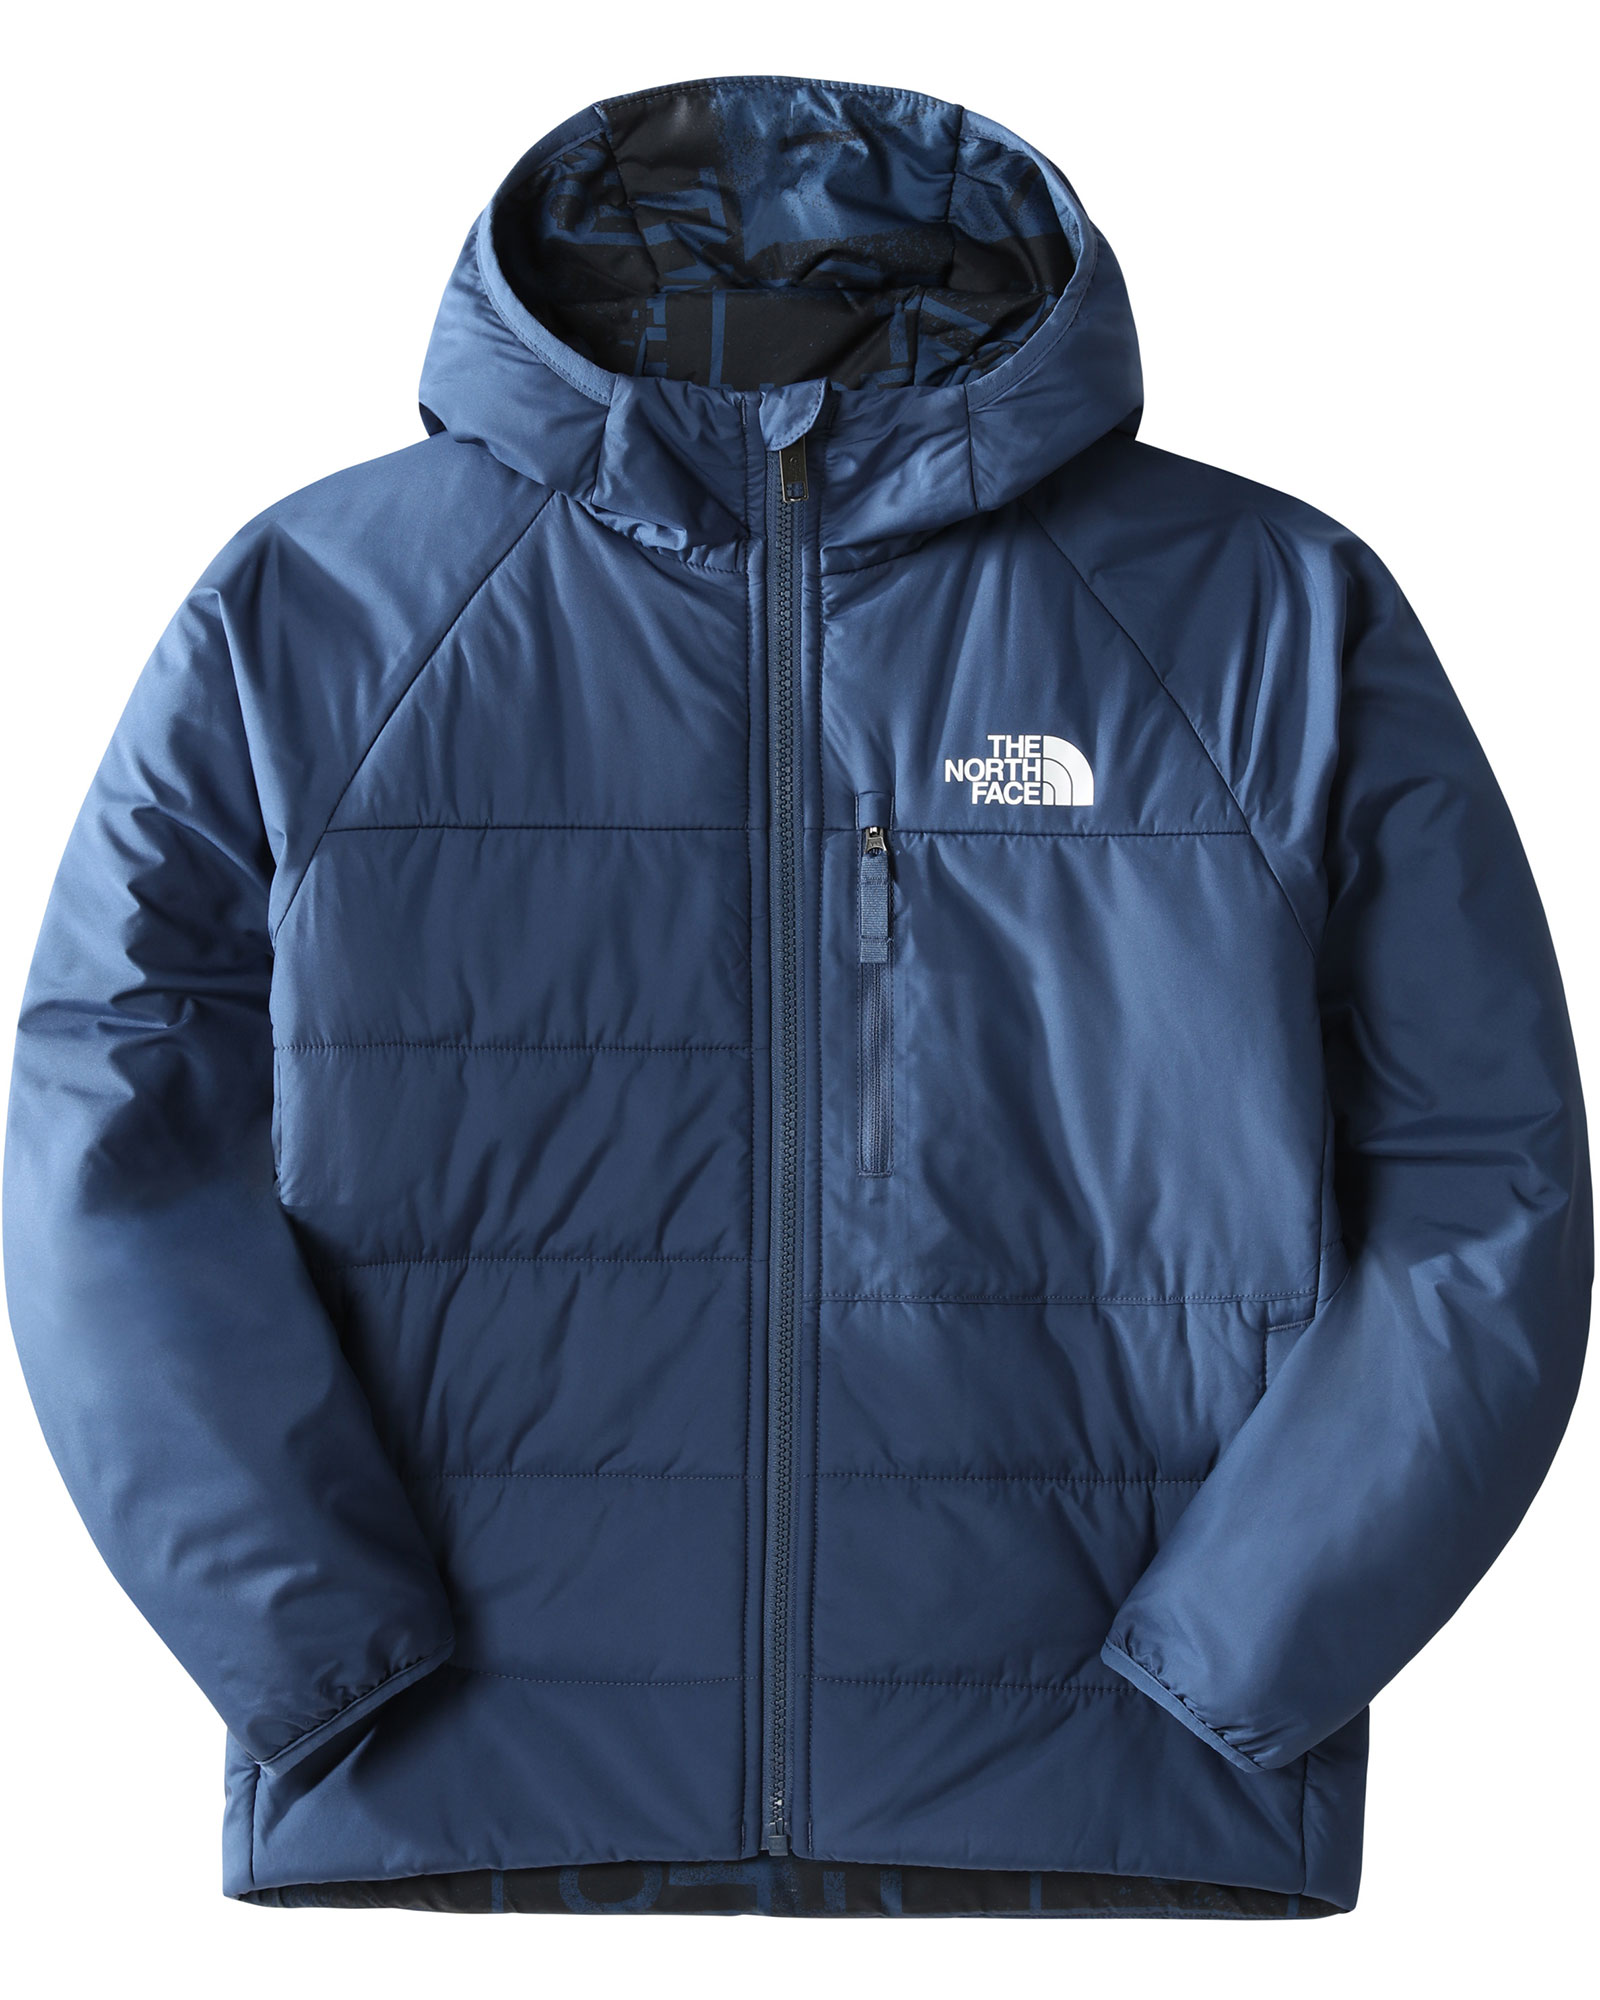 The North Face Reversible Perrito Kids’ Jacket XL - Shady Blue XL